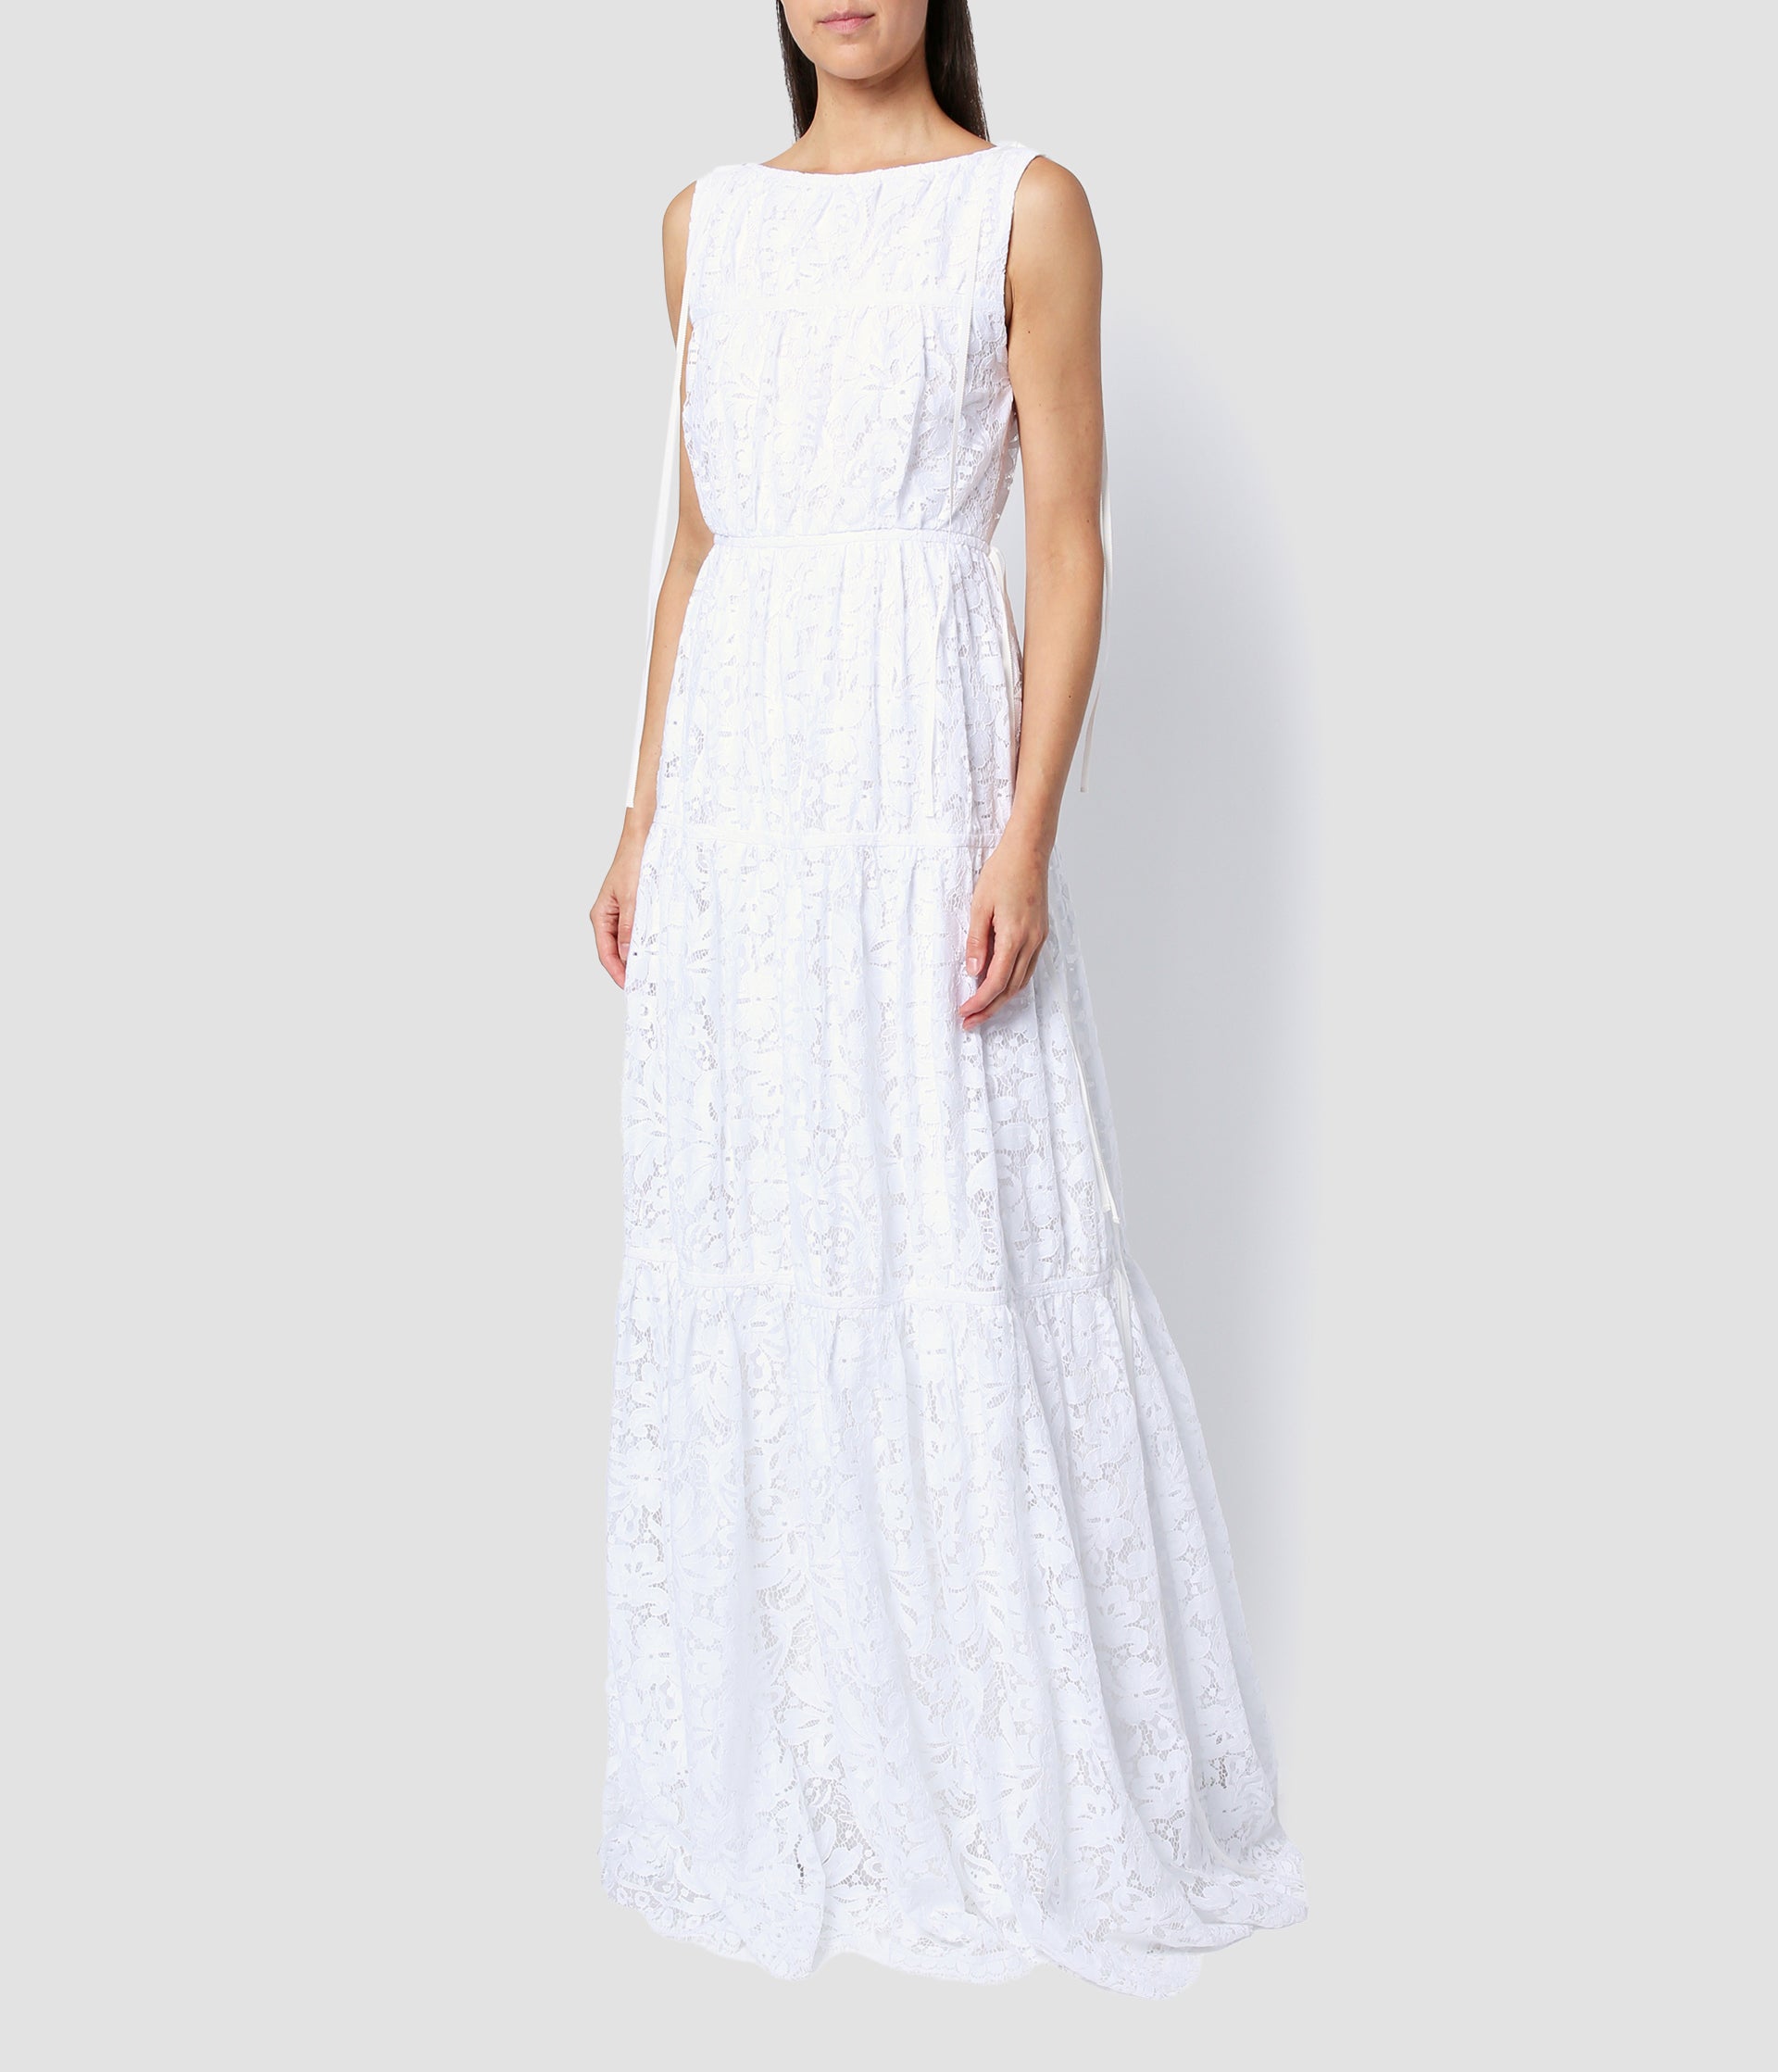 The Isla dress is a beautiful white floral lace wedding dress. WIth a tiered skirt, sleeveless design, this wedding dress is bohemian and relaxed. 